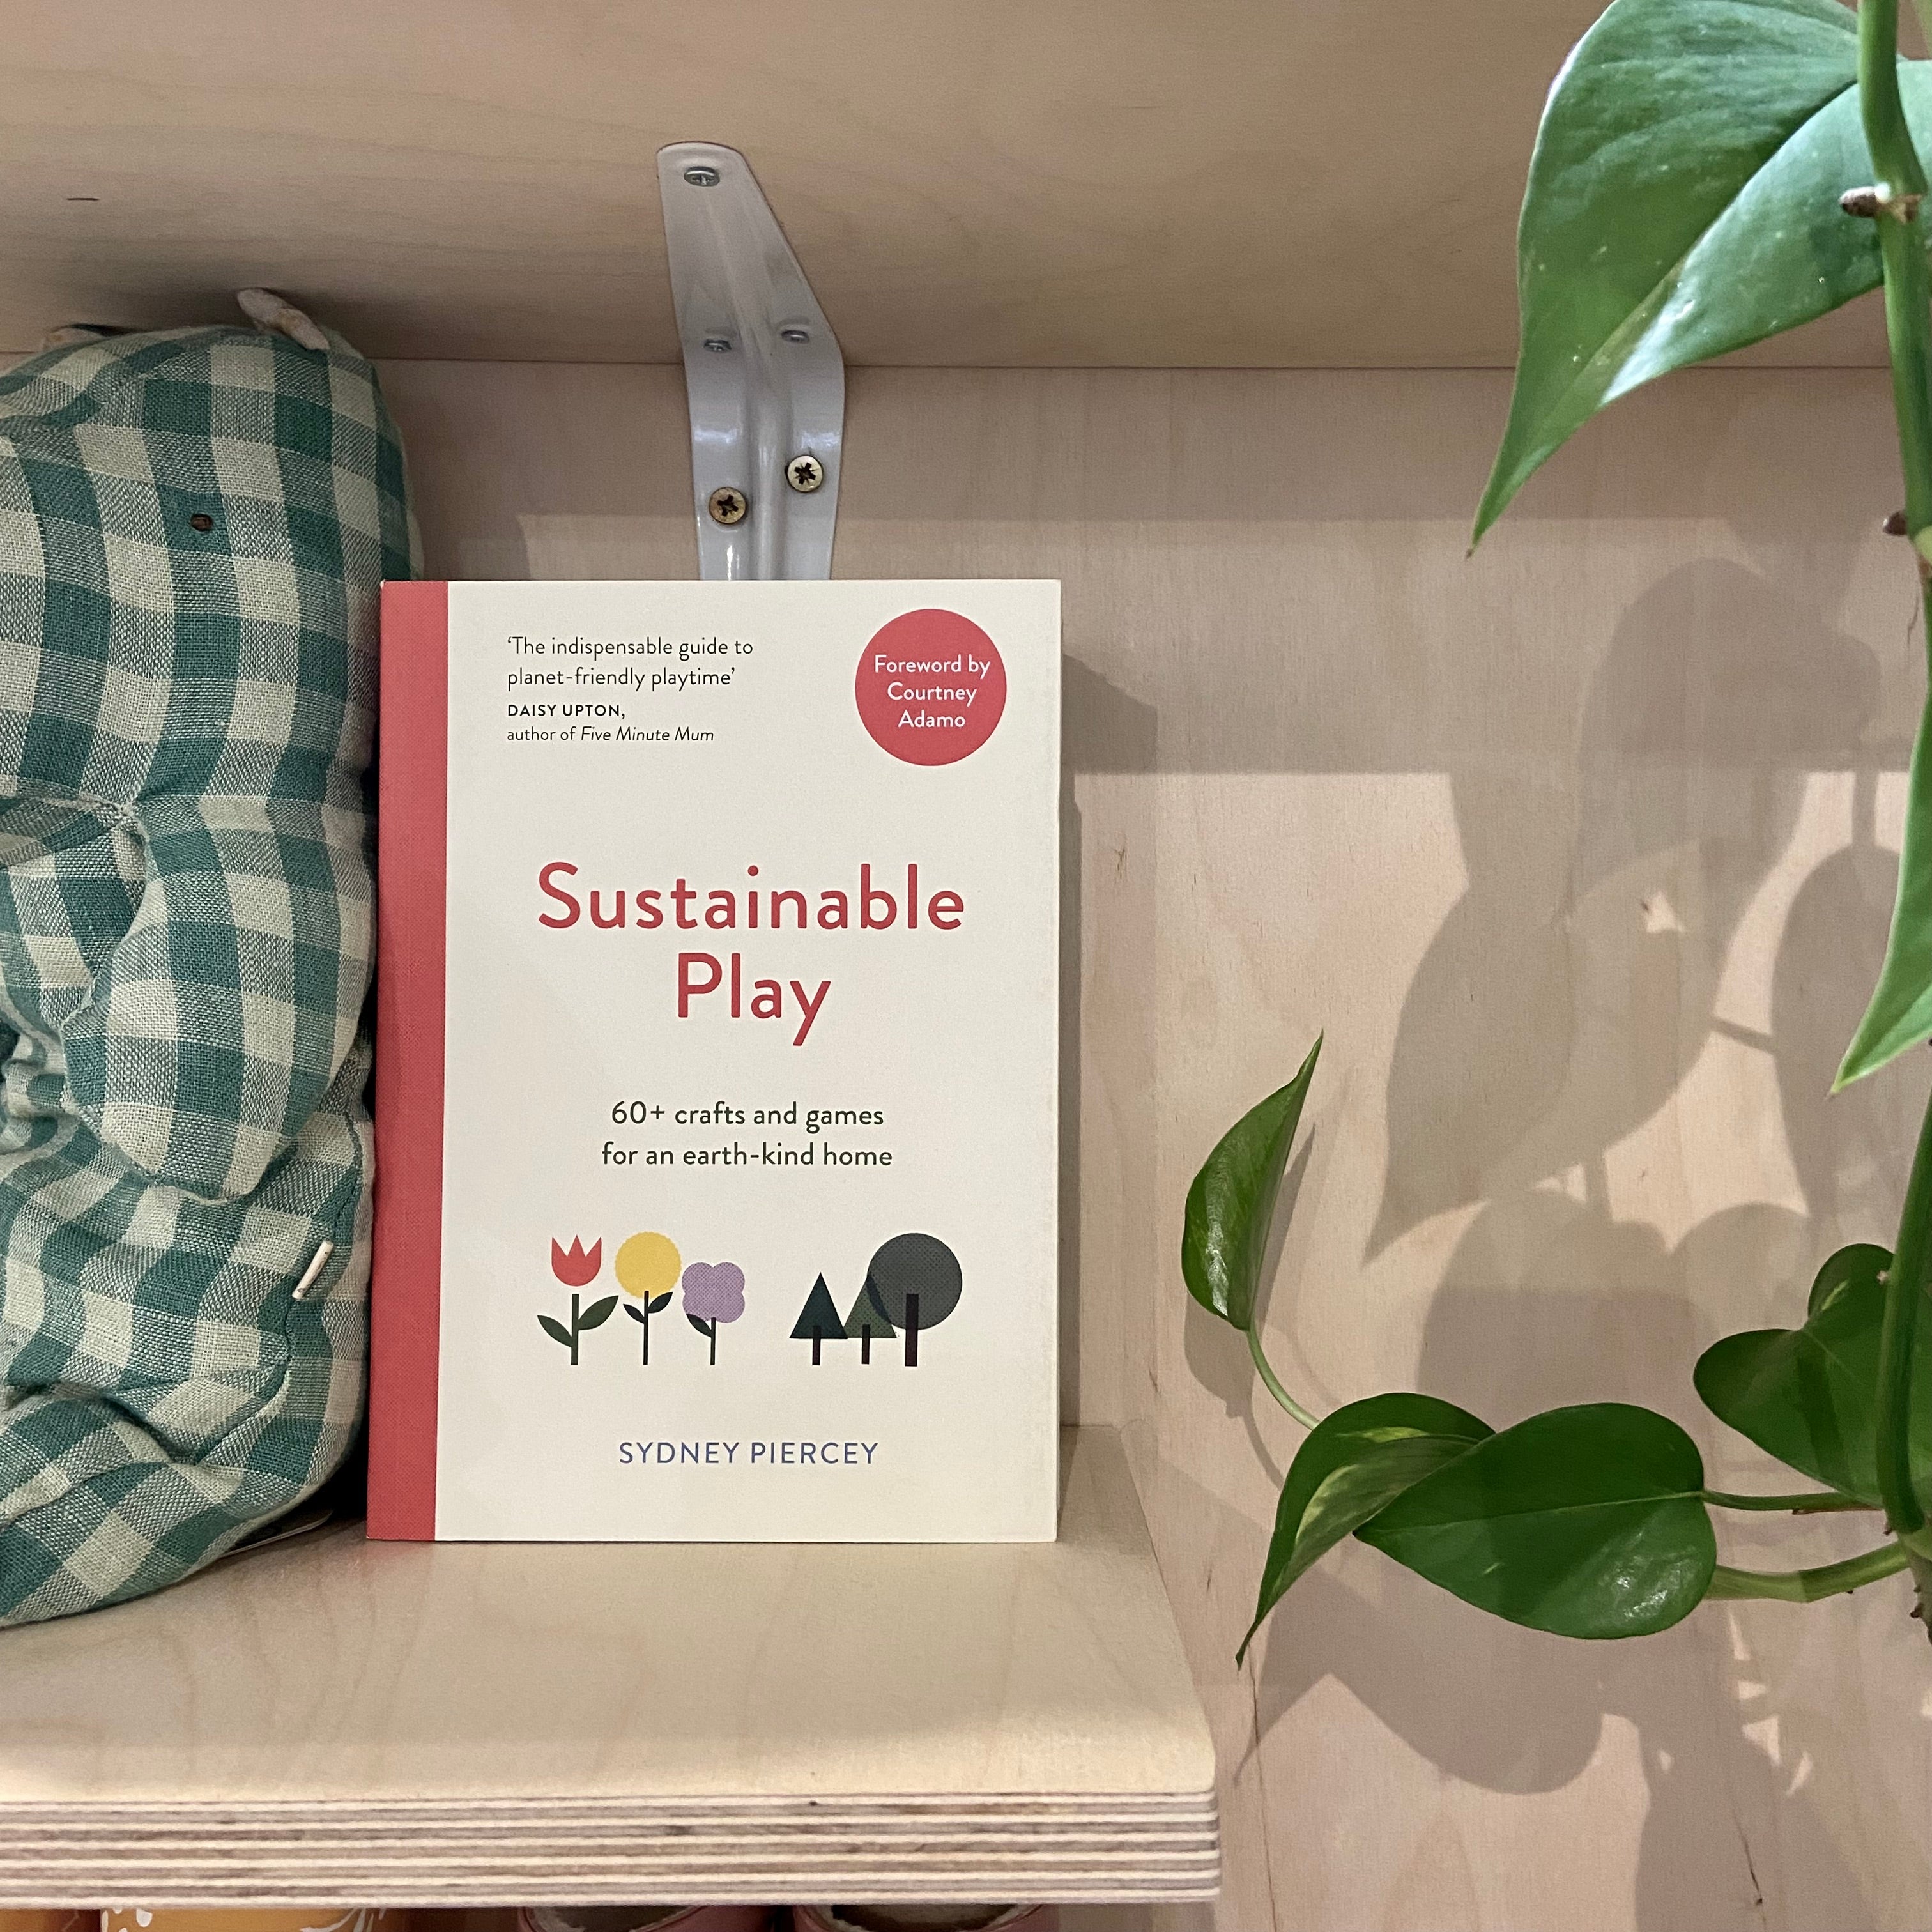 A book titled 'Sustainable Play' is placed on a shelf alongside a green checked hippo and green foliage on the other side of the image.